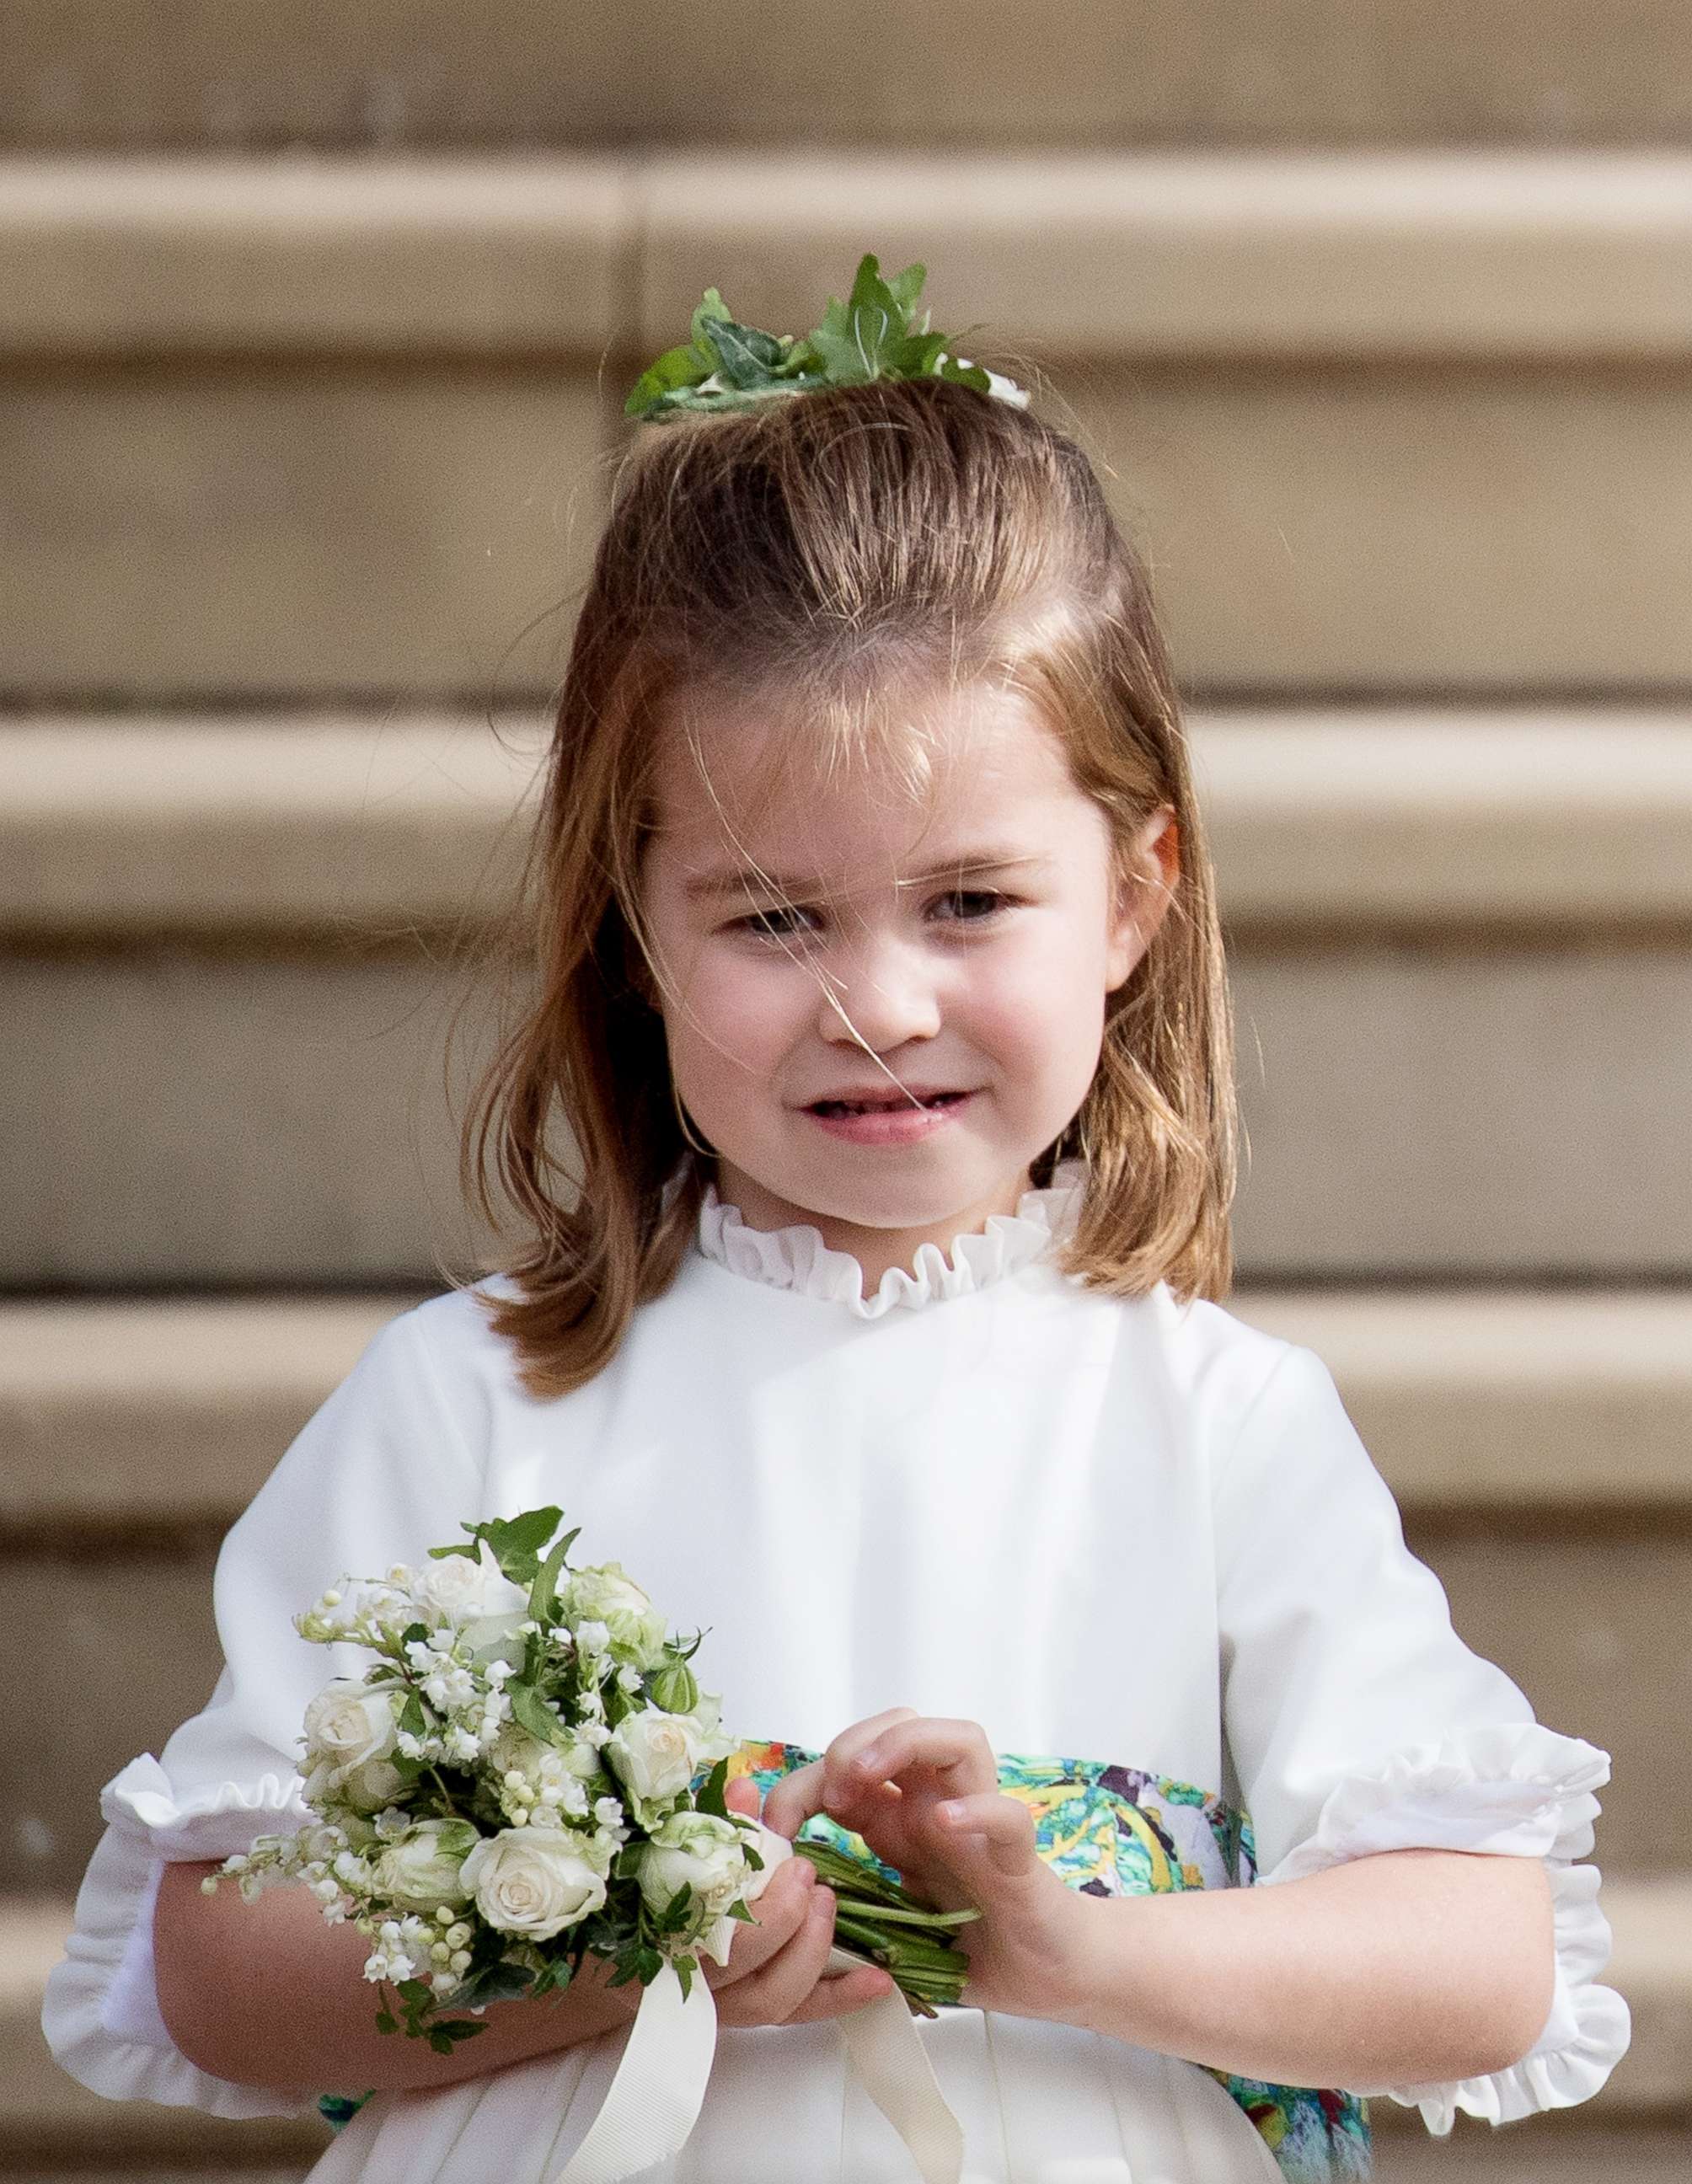 PHOTO: Princess Charlotte of Cambridge attends the wedding of Princess Eugenie of York and Jack Brooksbank at St George's Chapel in Windsor Castle, Oct. 12, 2018, in Windsor, England.